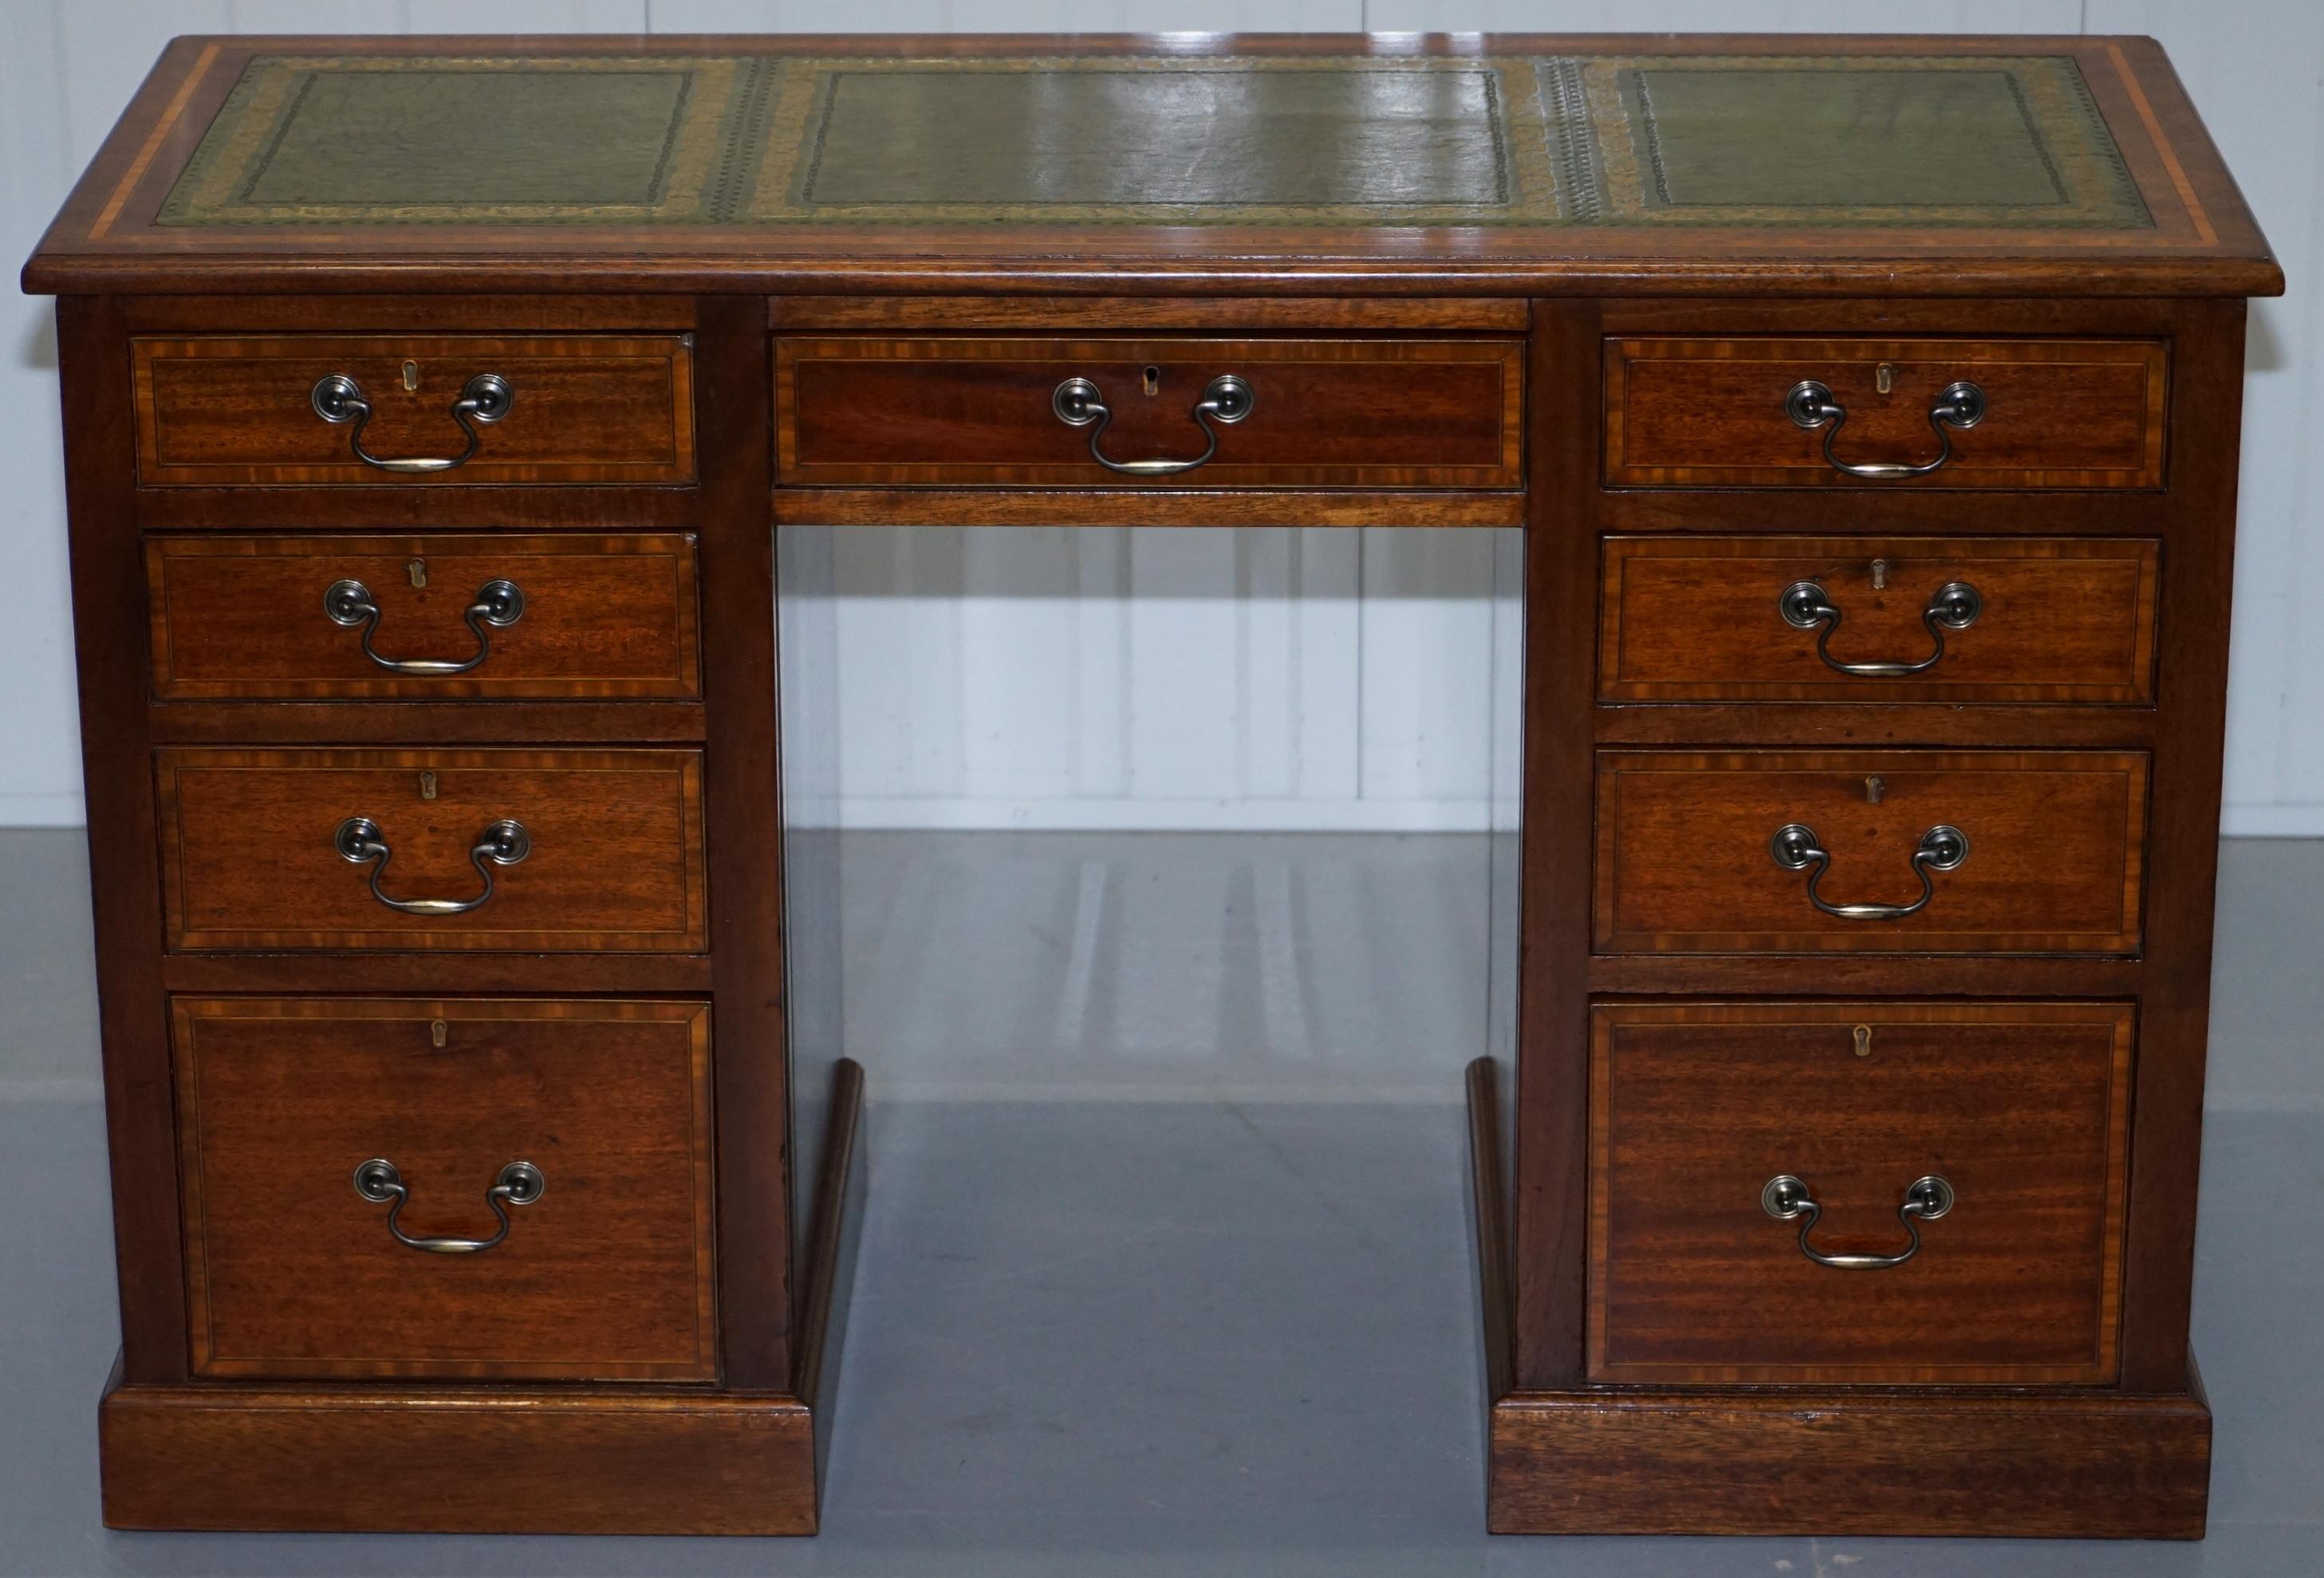 We are delighted to offer for sale this lovely antique mahogany with walnut inlay and green Leather gold embossed writing surface pedestal partners desk

A good looking and a well made decorative piece of furniture, there are many levels in these